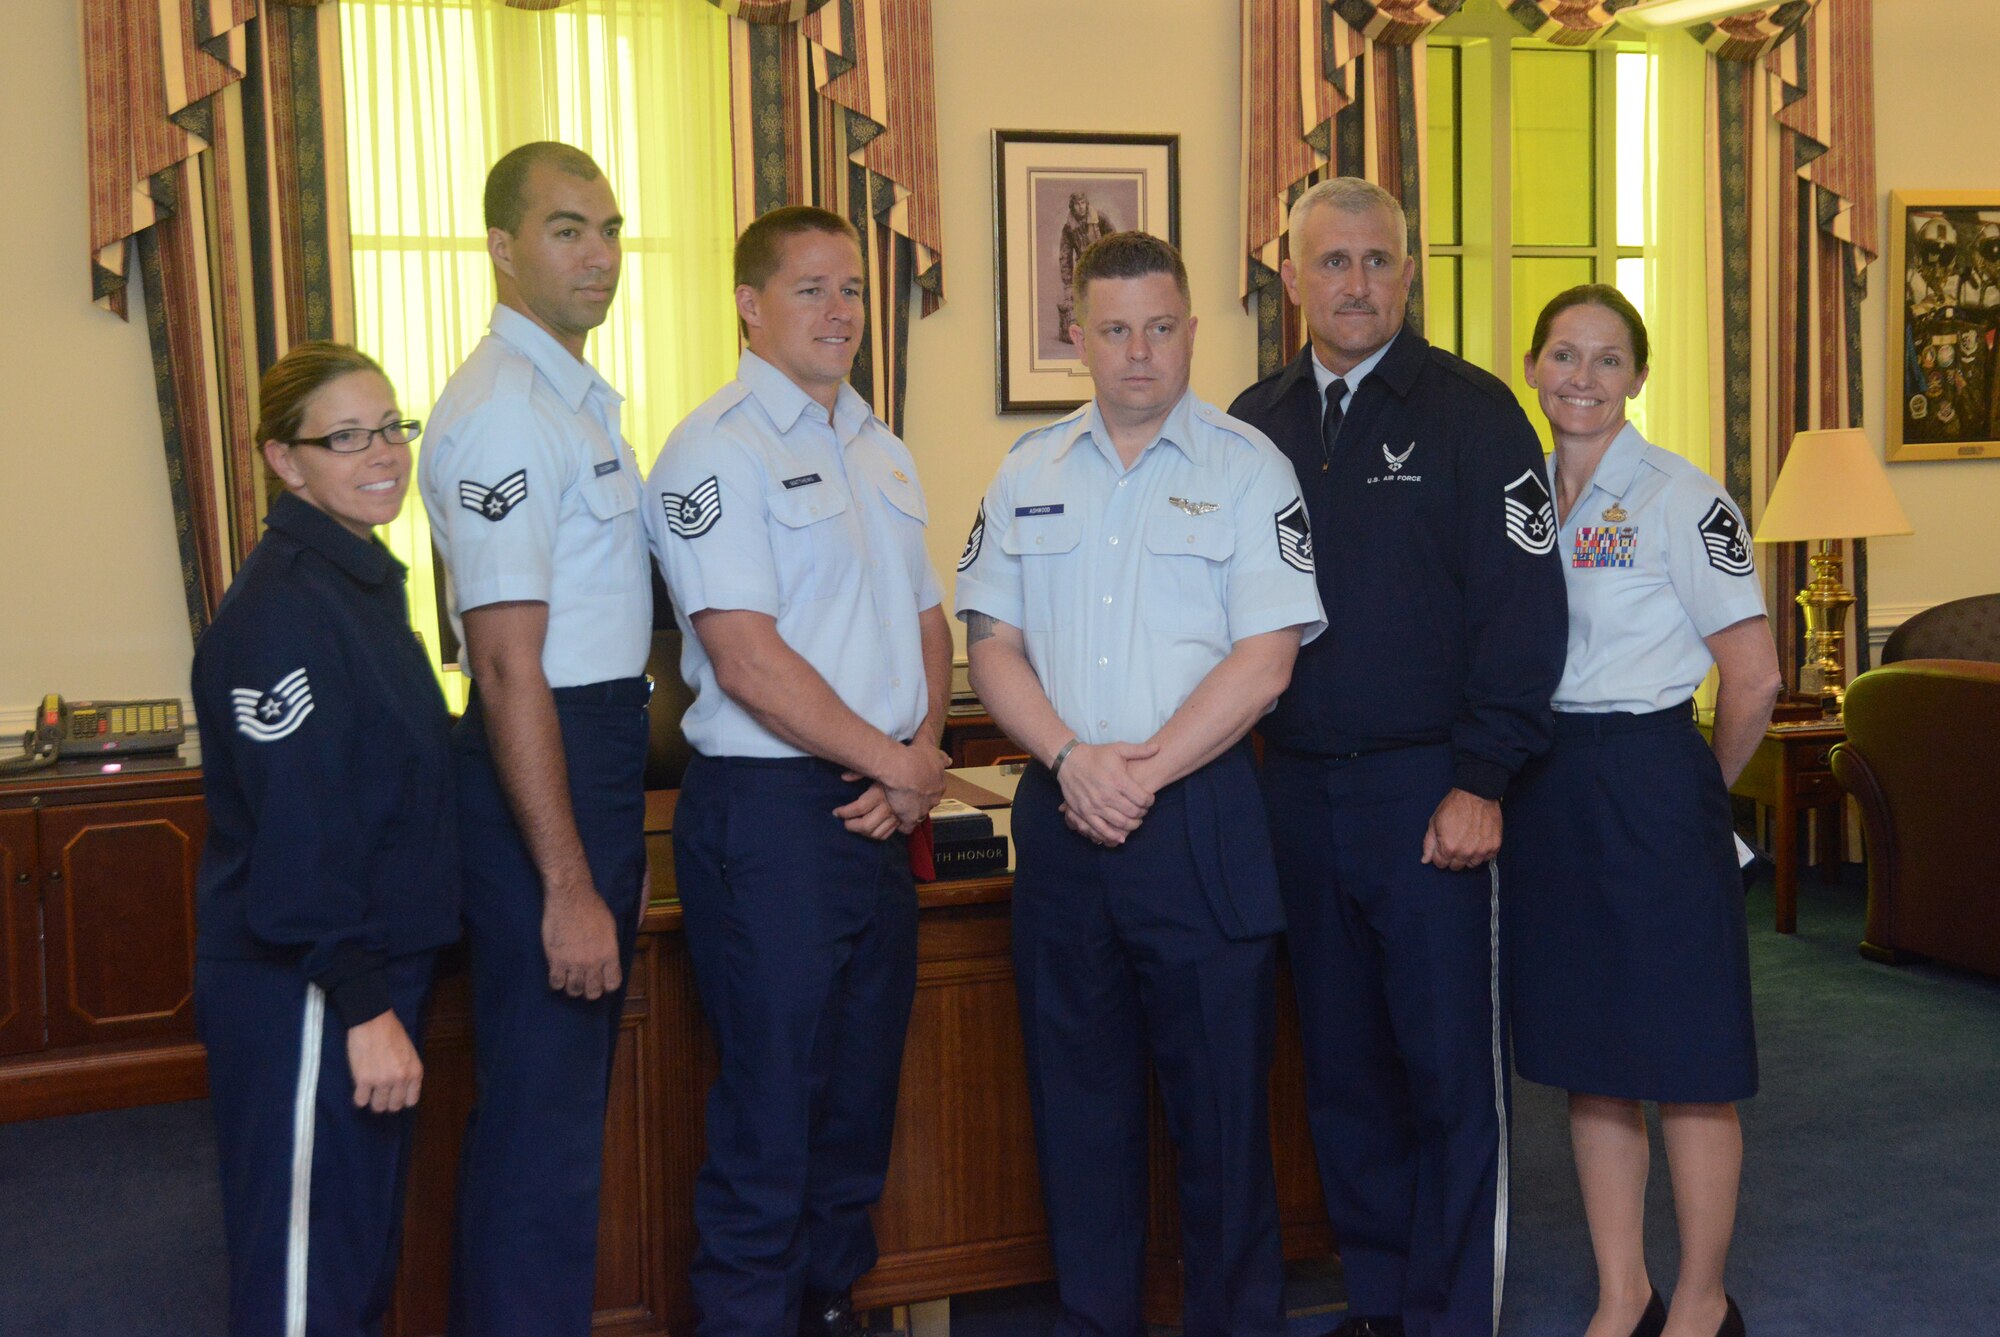 The Air National Guard's Outstanding Airmen of the Year visit Air Force Chief of Staff Gen. Mark A. Welsh III's office during their tour of the Pentagon August 4, 2014. The Airmen are in the National Capitol Region for Focus on the Force Week, highlighting the ANG's enlisted force. (U.S. Air National Guard photo by Senior Airman John E. Hillier/Released)